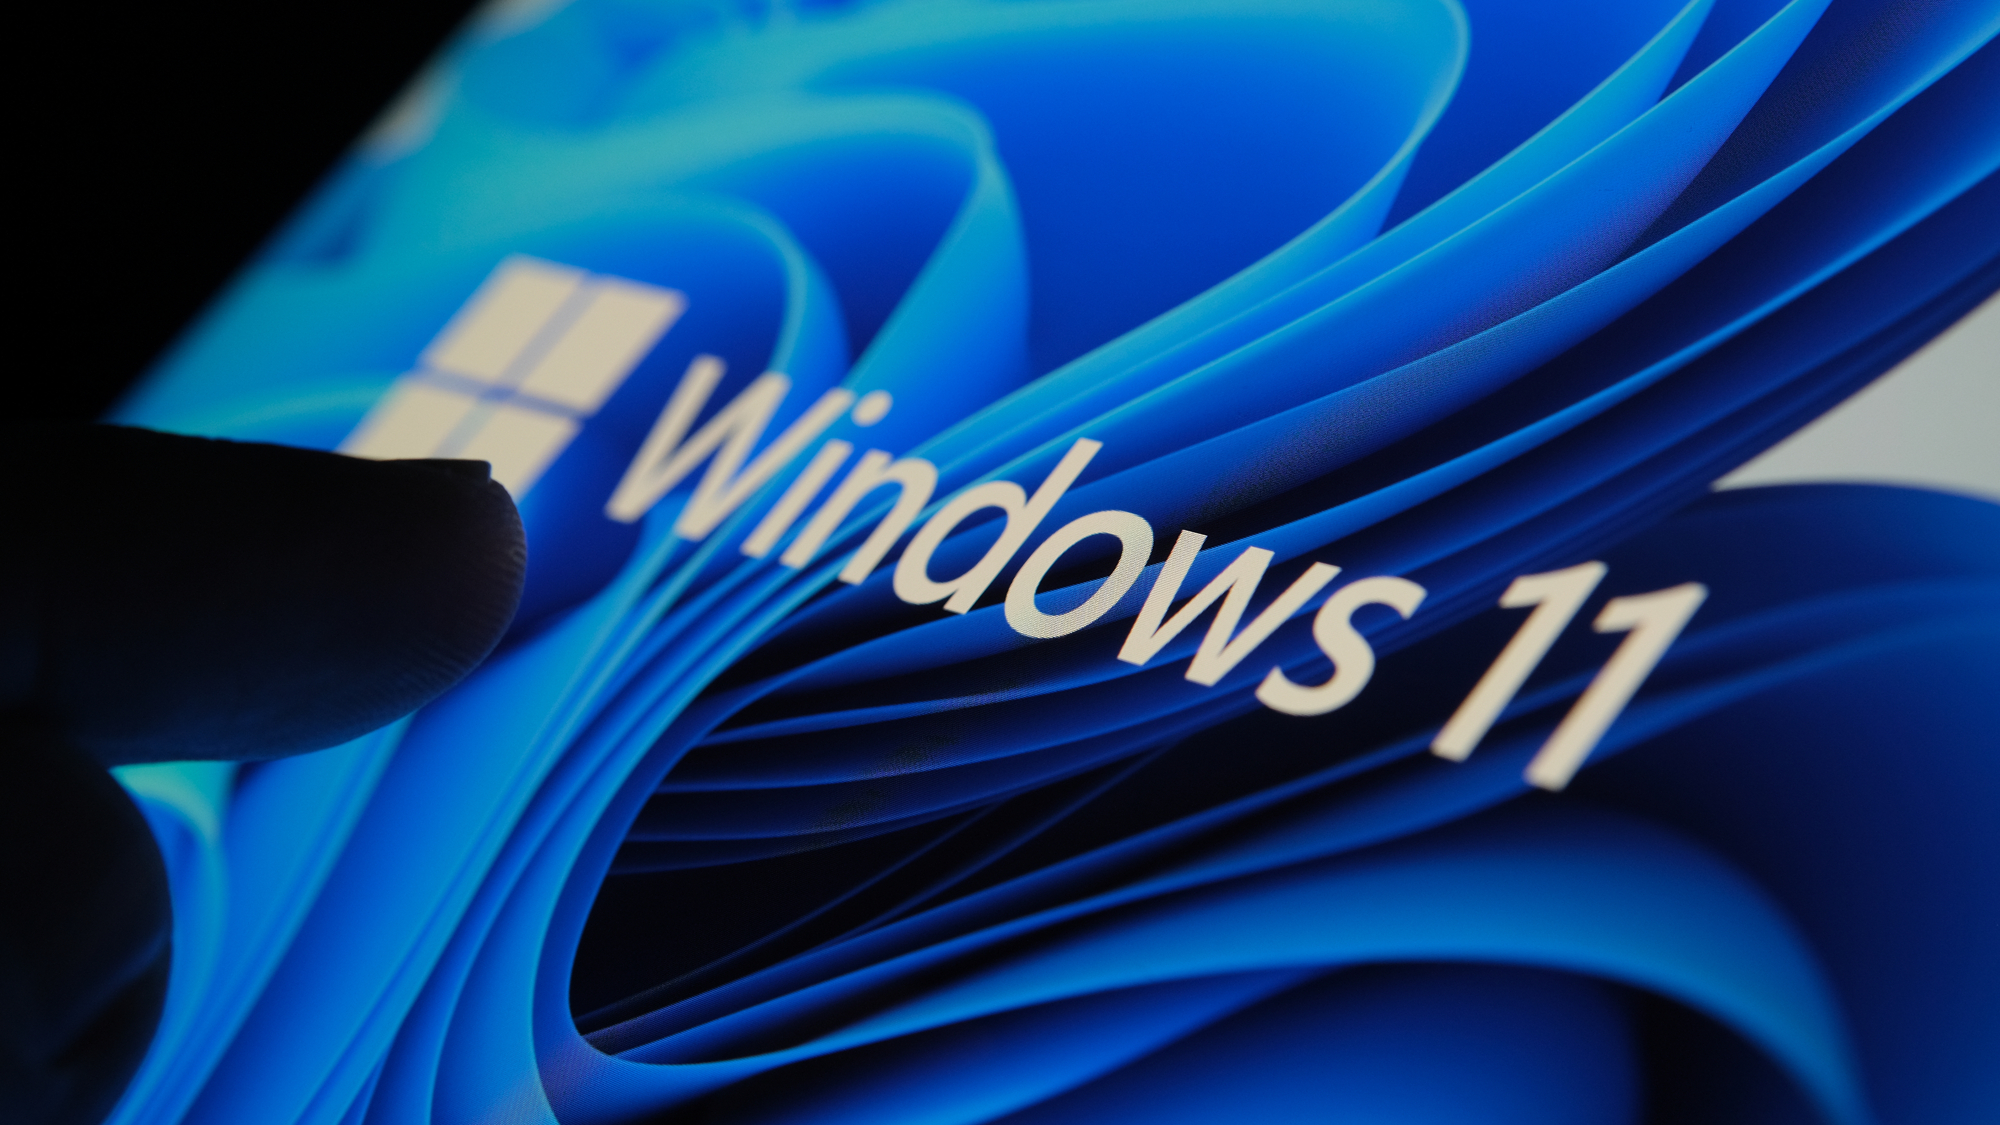 How to Get Windows 11 Windows 10 for Free Under $20) | Tom's